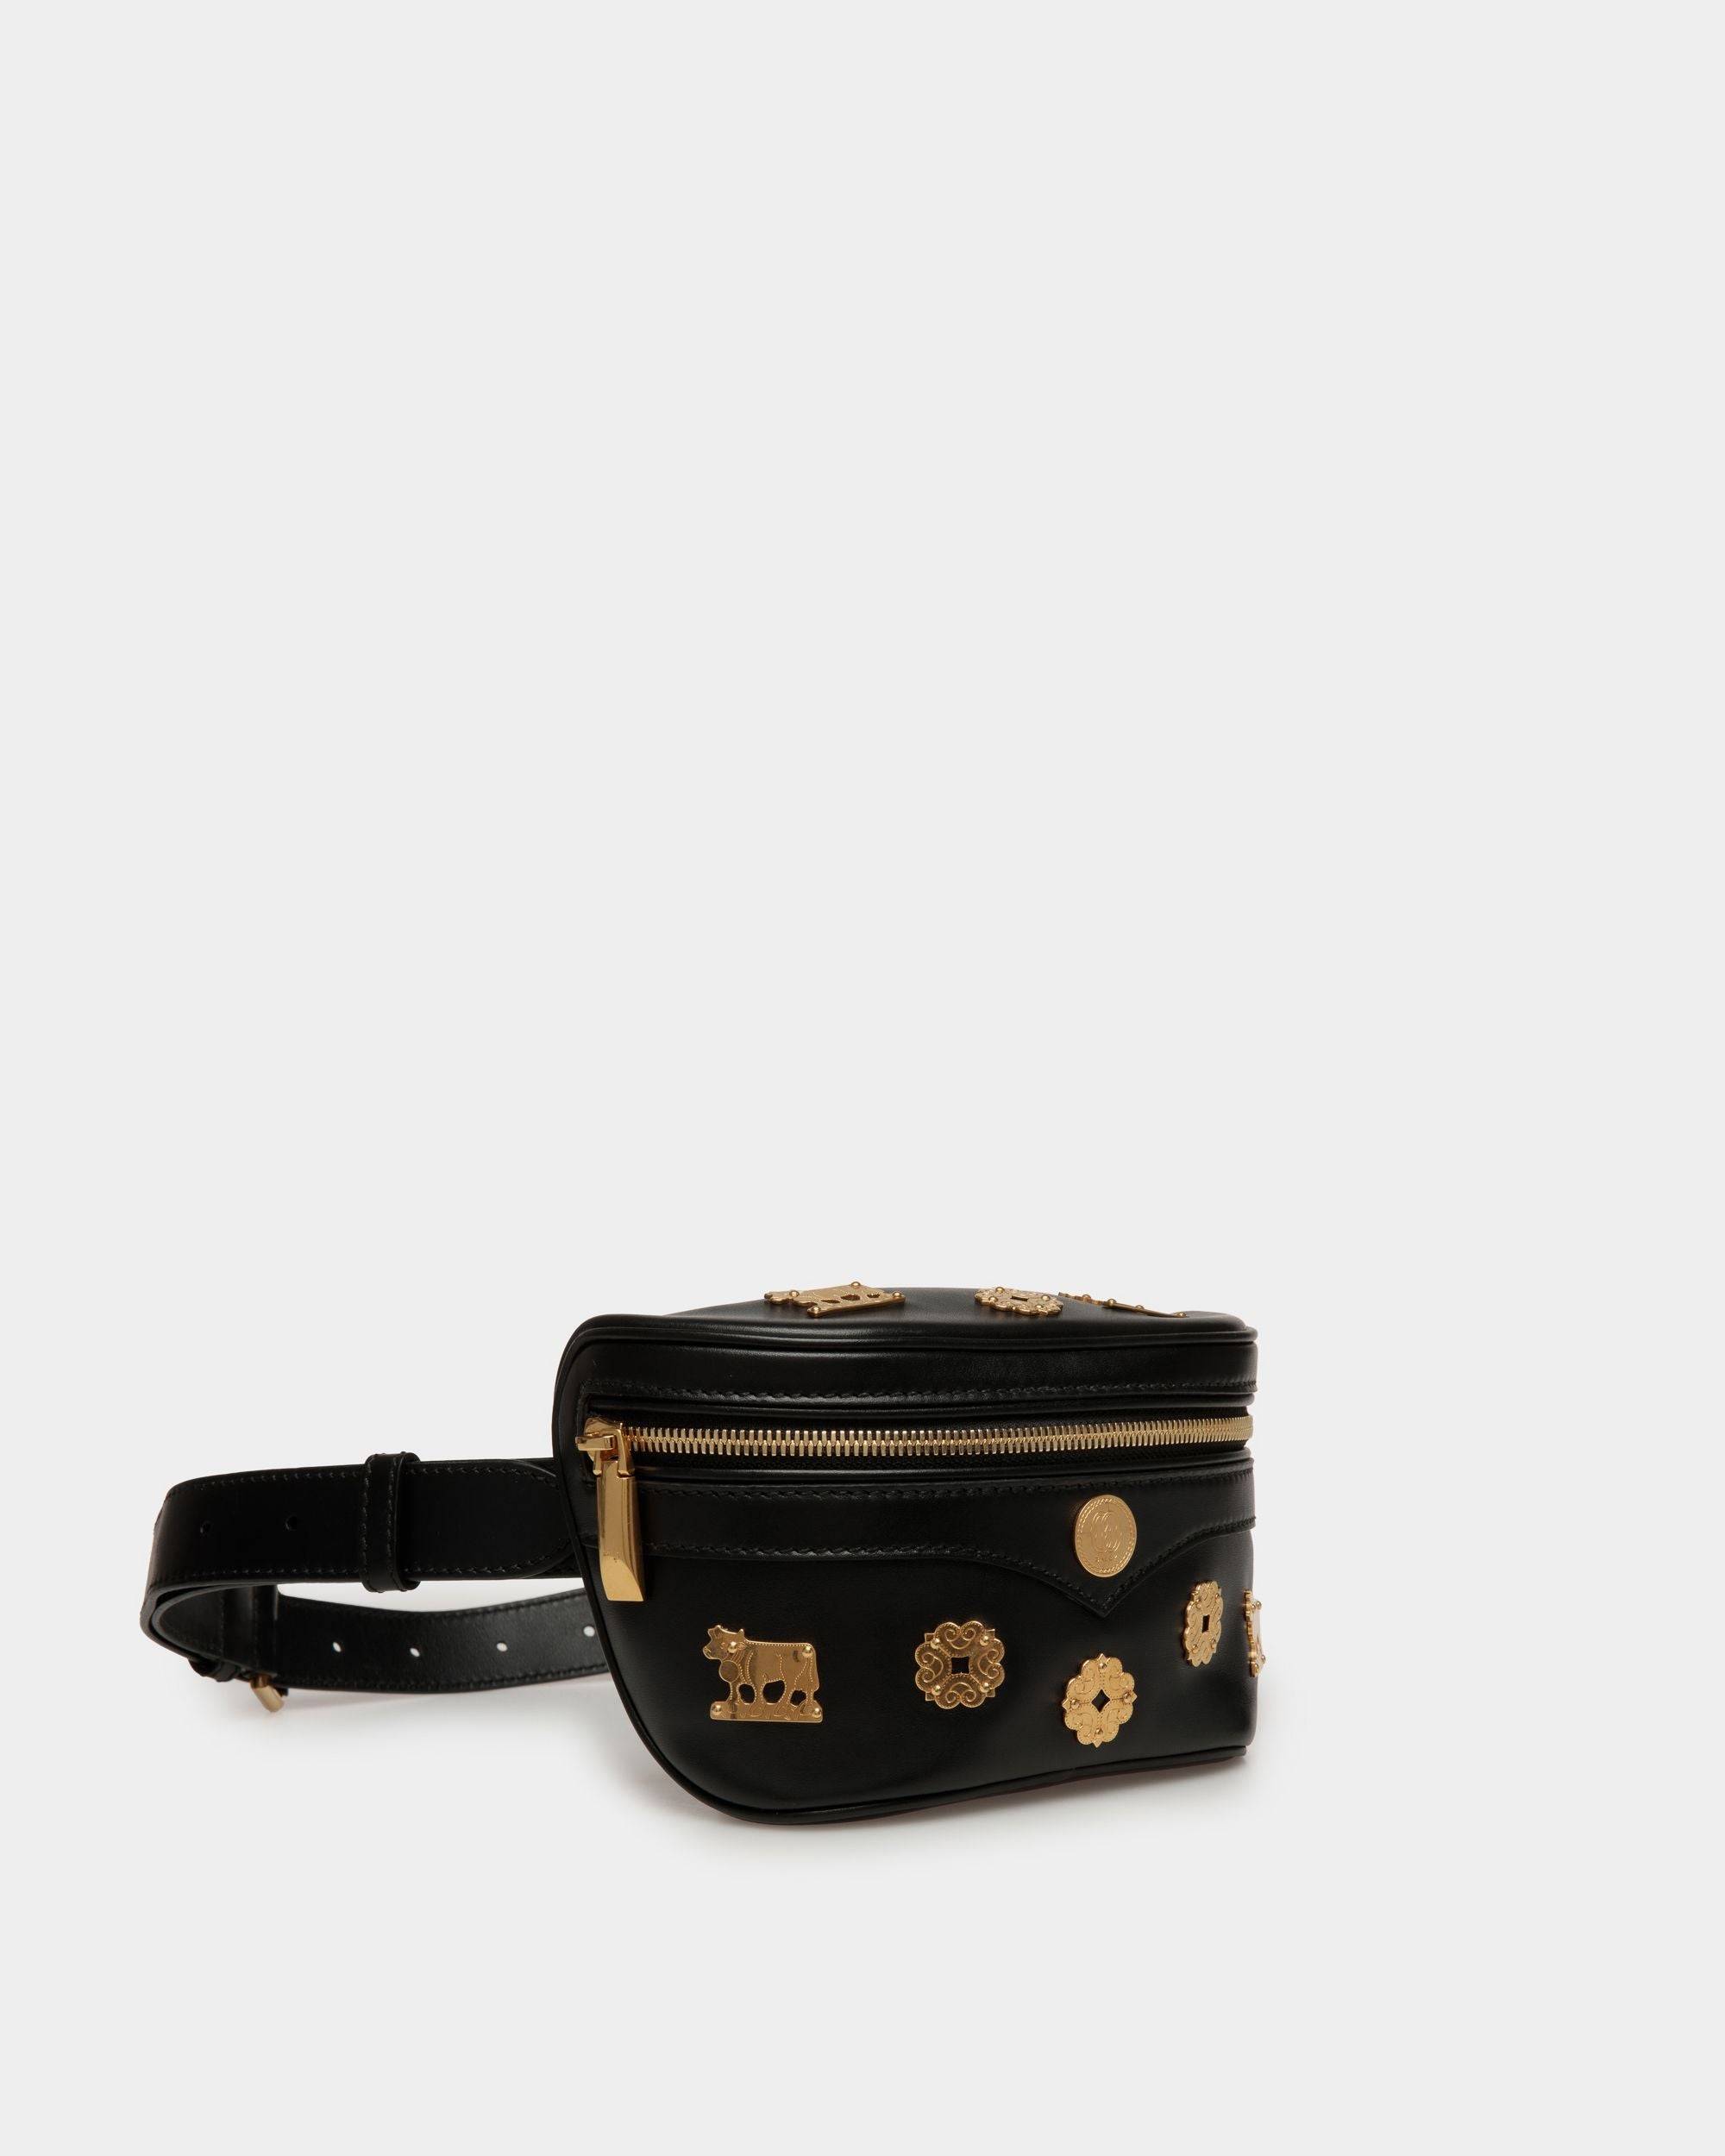 Moutain | Women's Belt Bag  in Black Leather | Bally | Still Life 3/4 Front